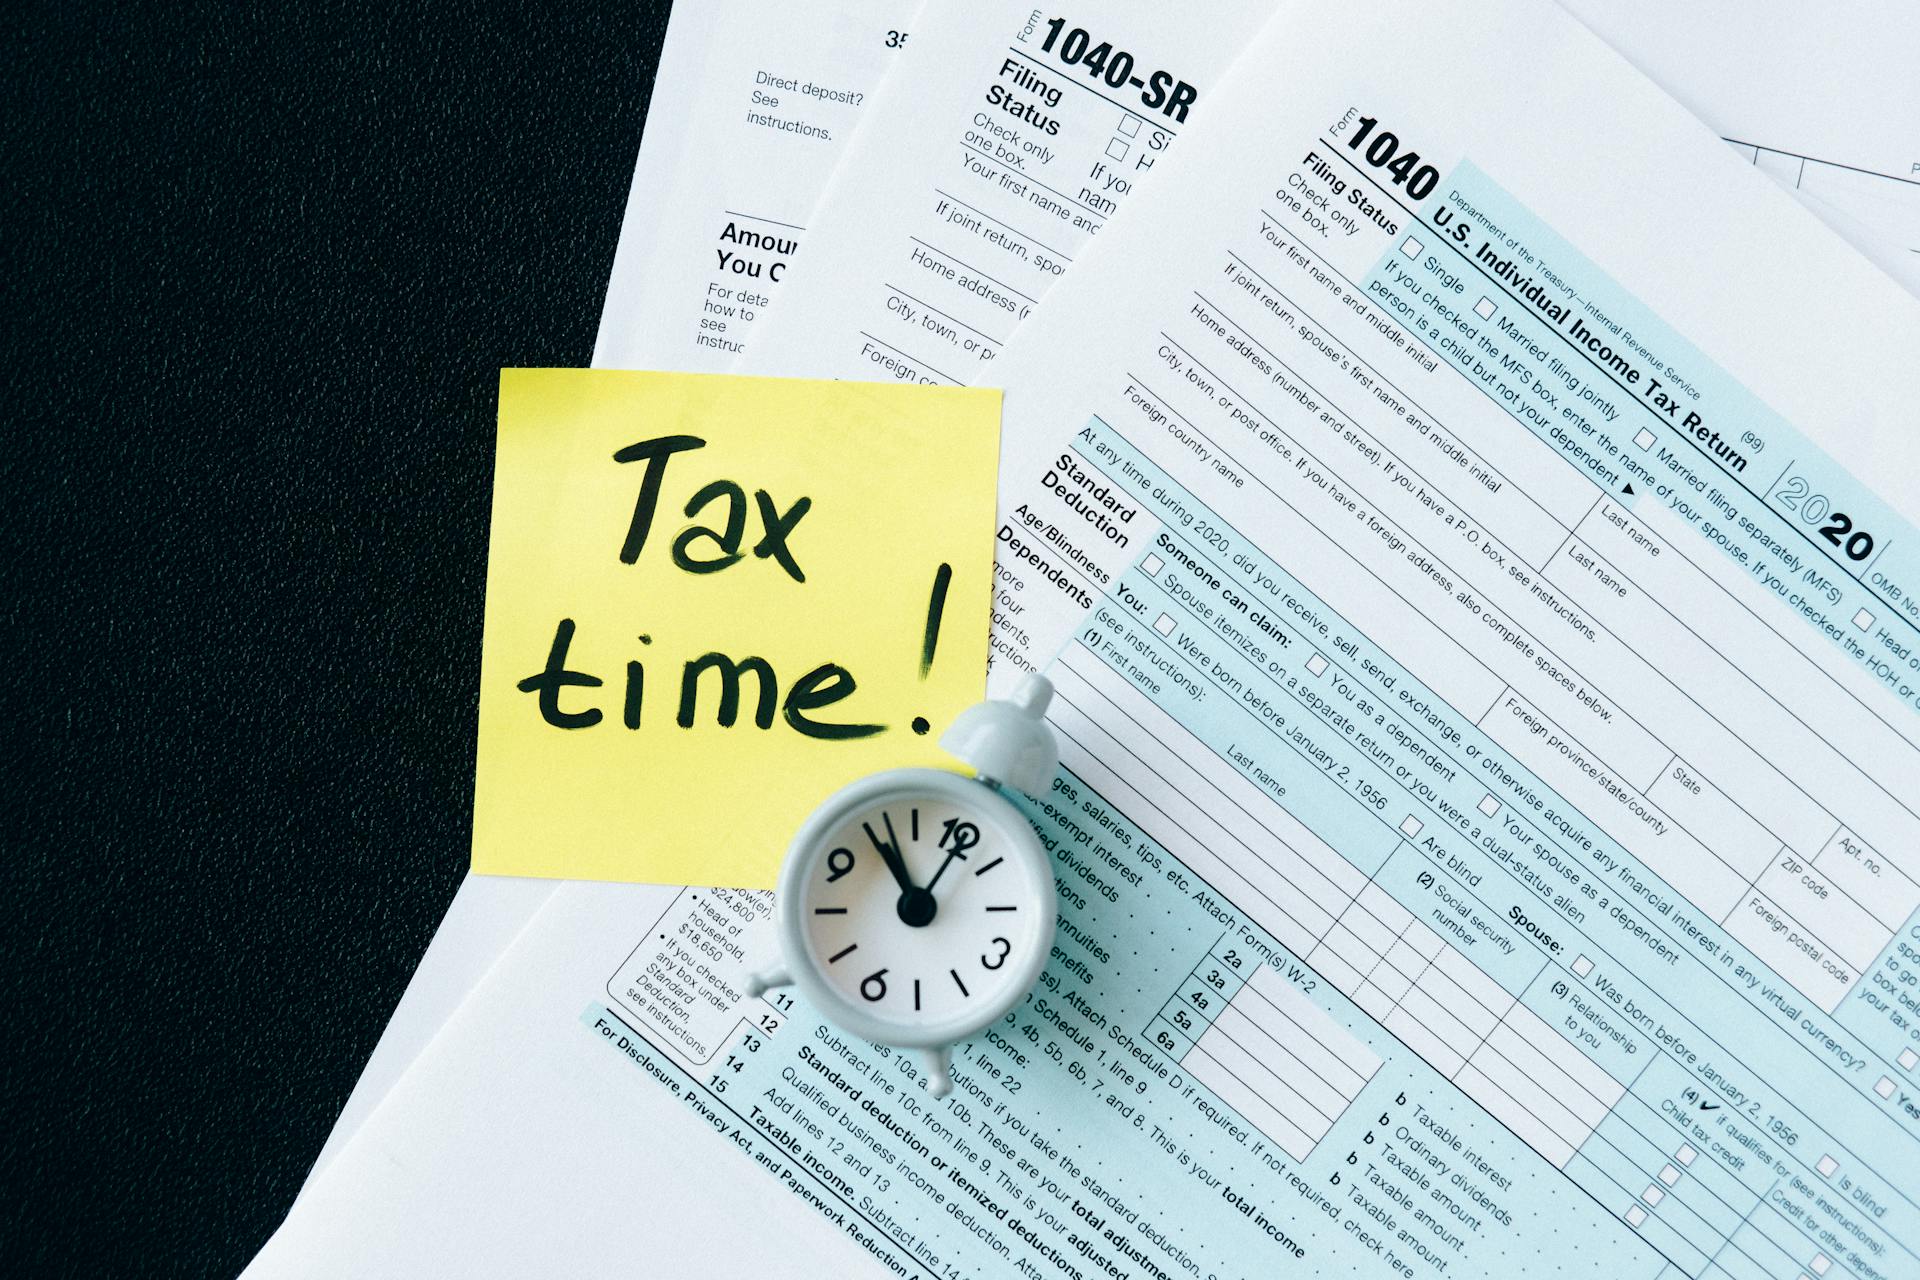 Why Getting Help With Your Taxes Is A Good Idea